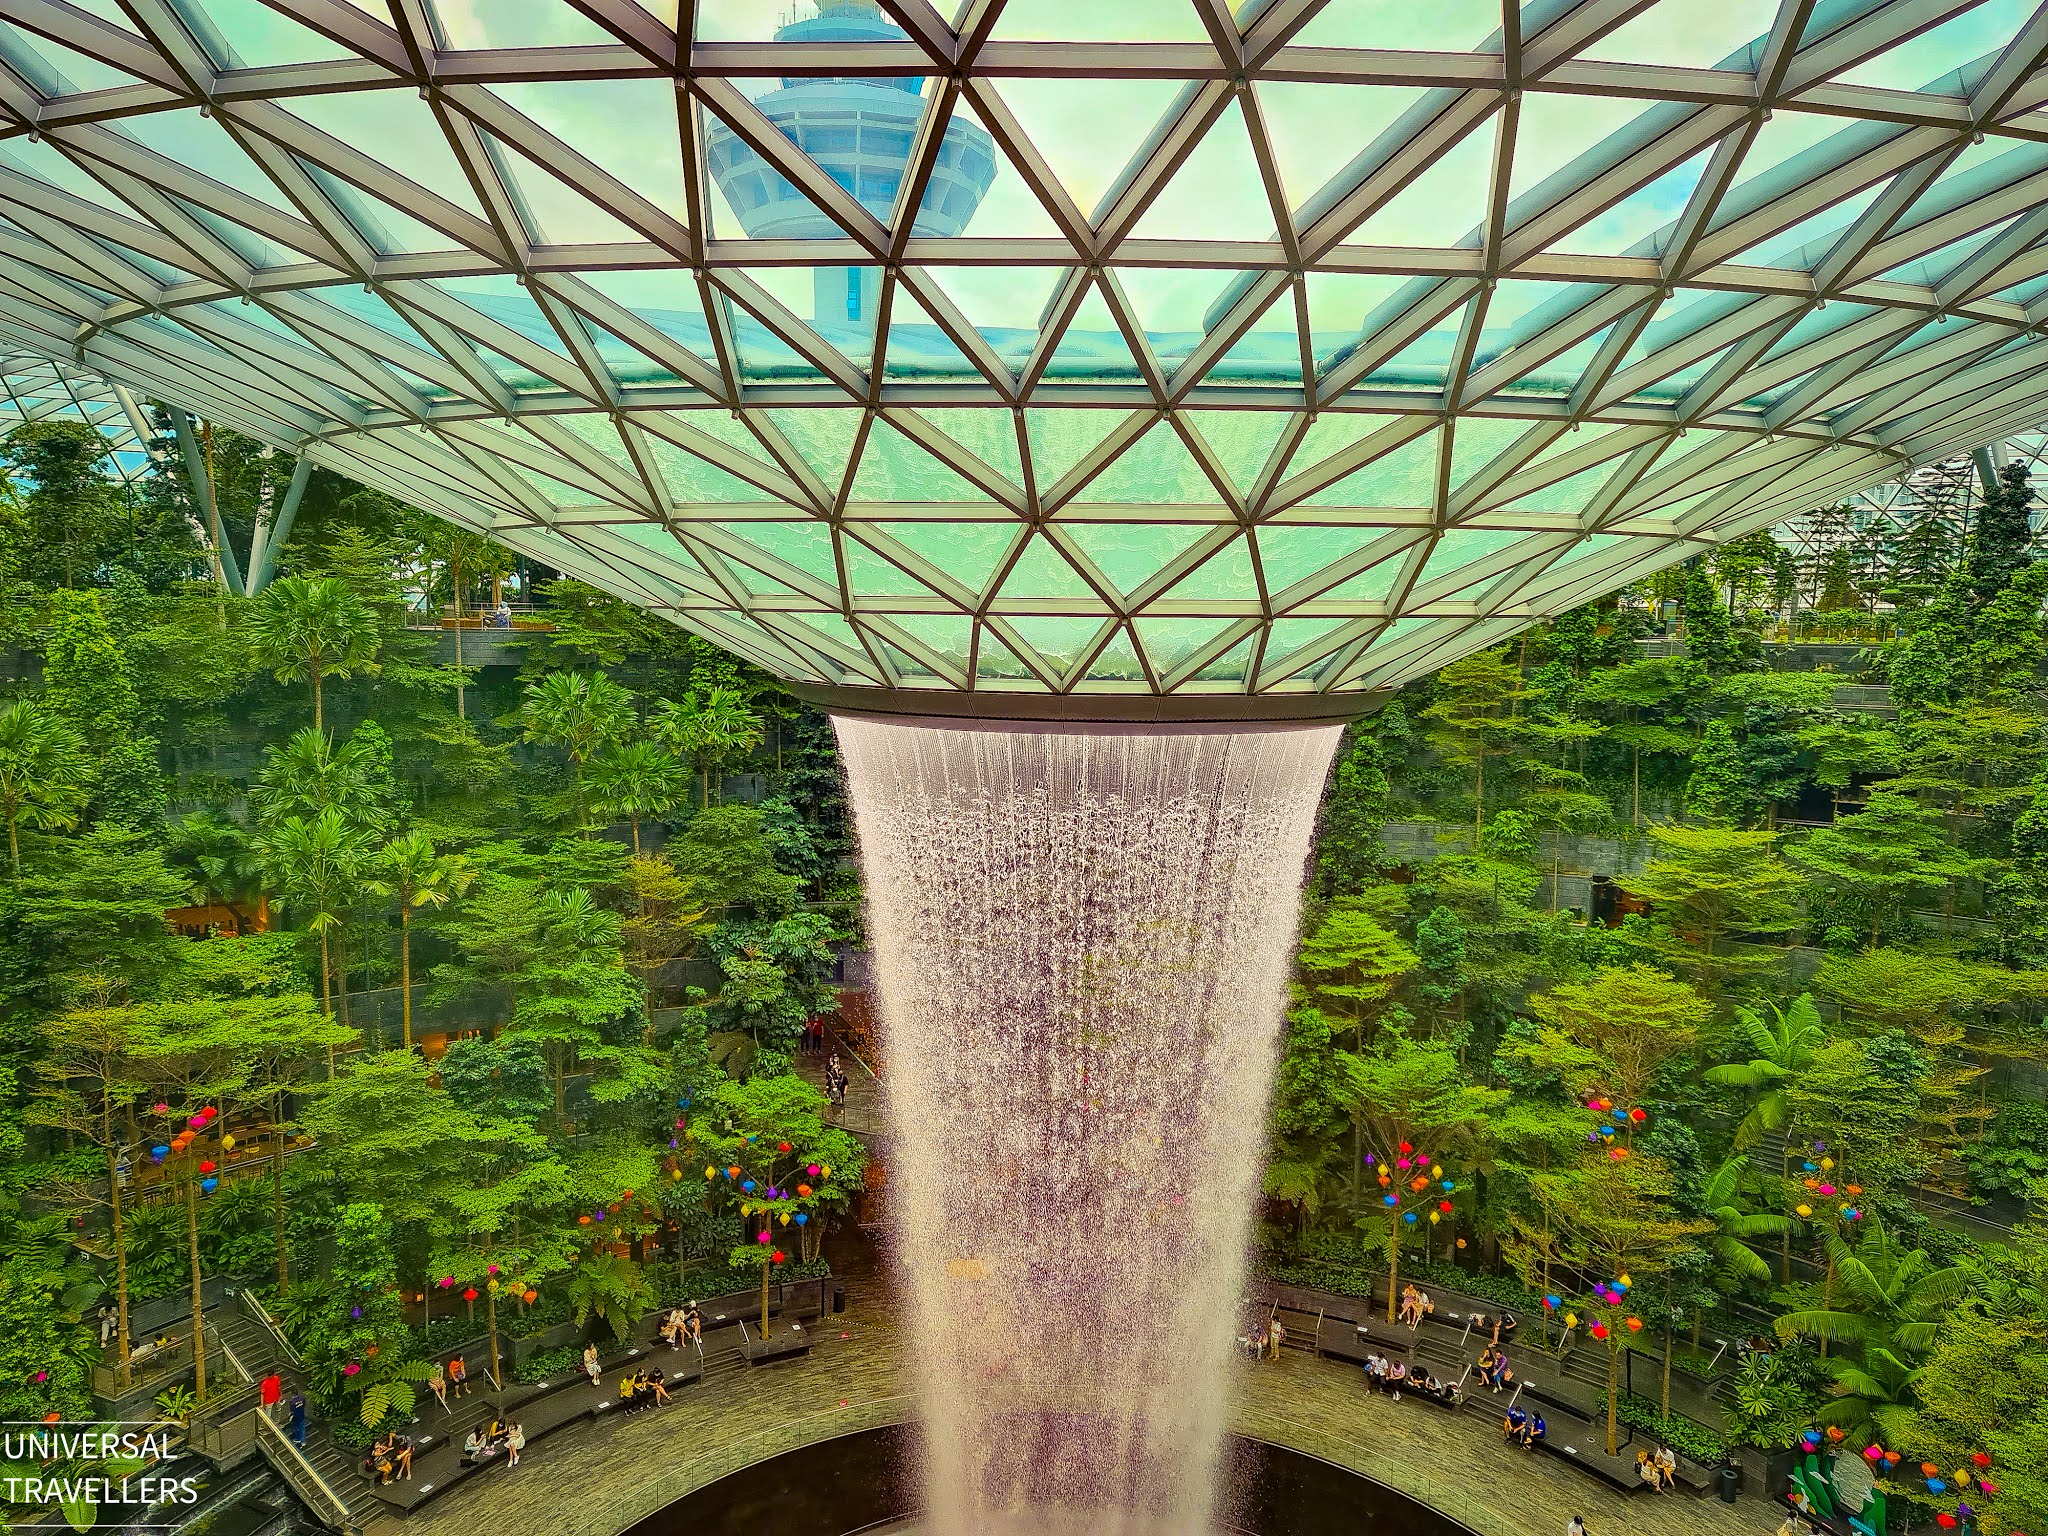 HSBC Rain Vortex located at the center of the Shiseido Forest Valley inside the Jewel Changi Airport